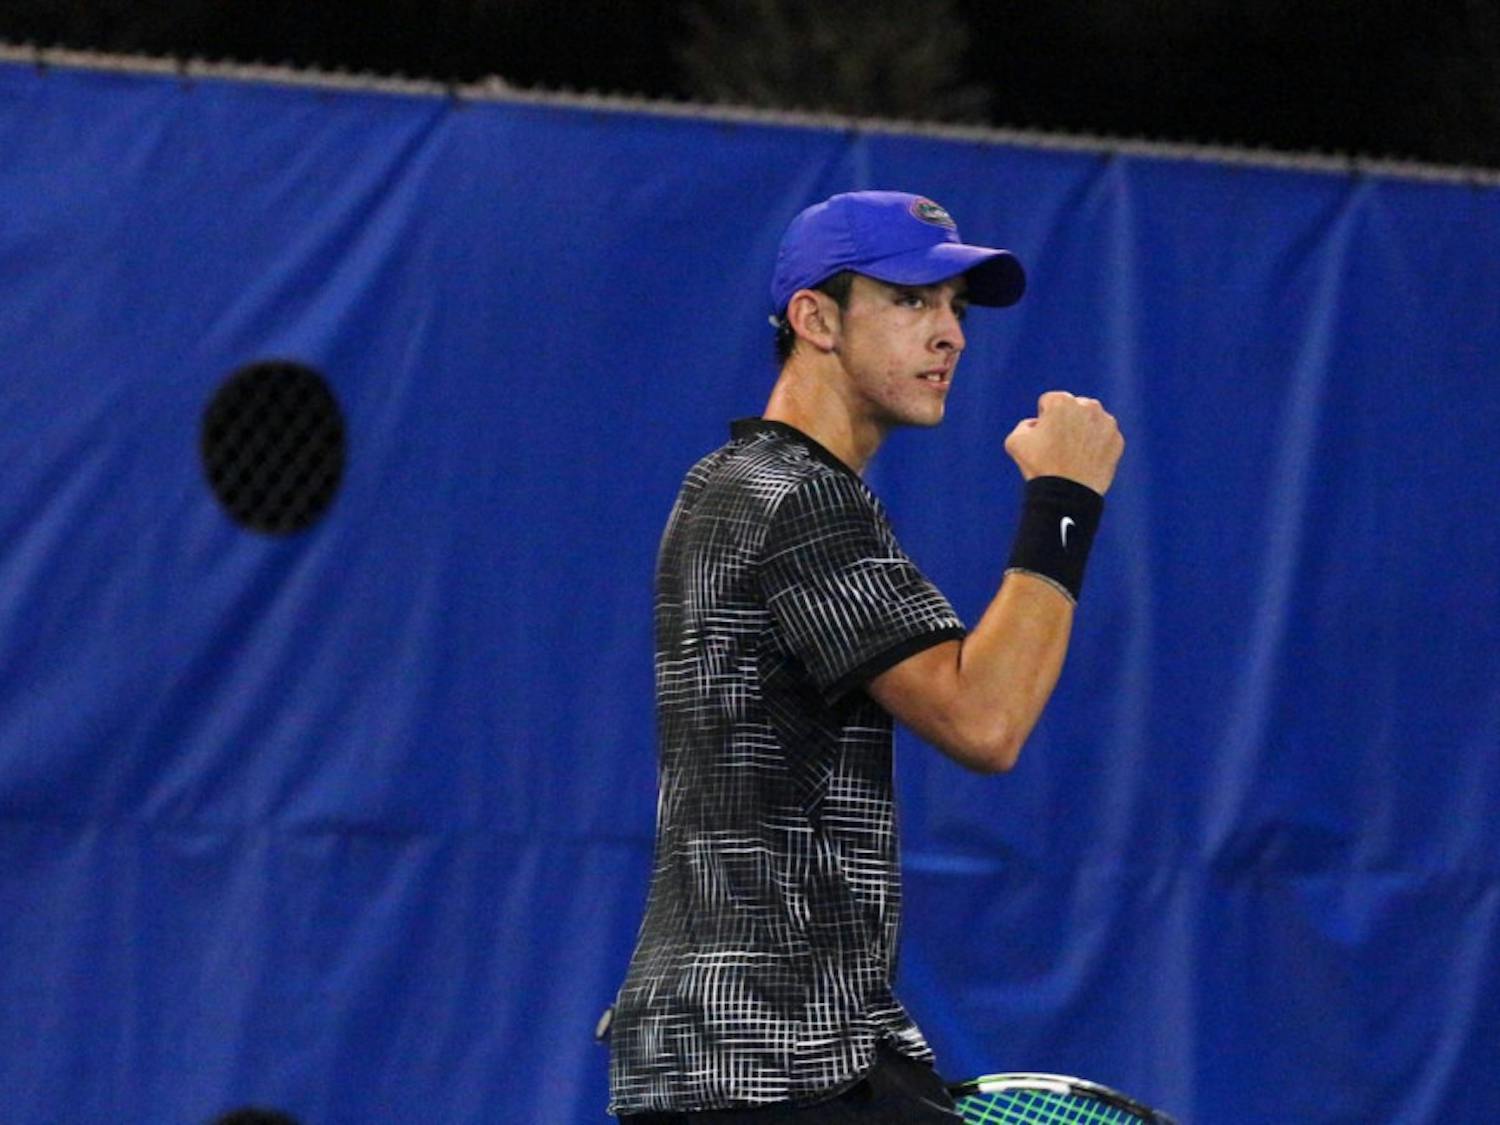 The Gators' men's tennis team topped Georgia 5-2. Sophomore Andy Andrade (pictured) clinched the match&nbsp;with a three-set win over Georgia's No. 10 Jan Zielinski.&nbsp;